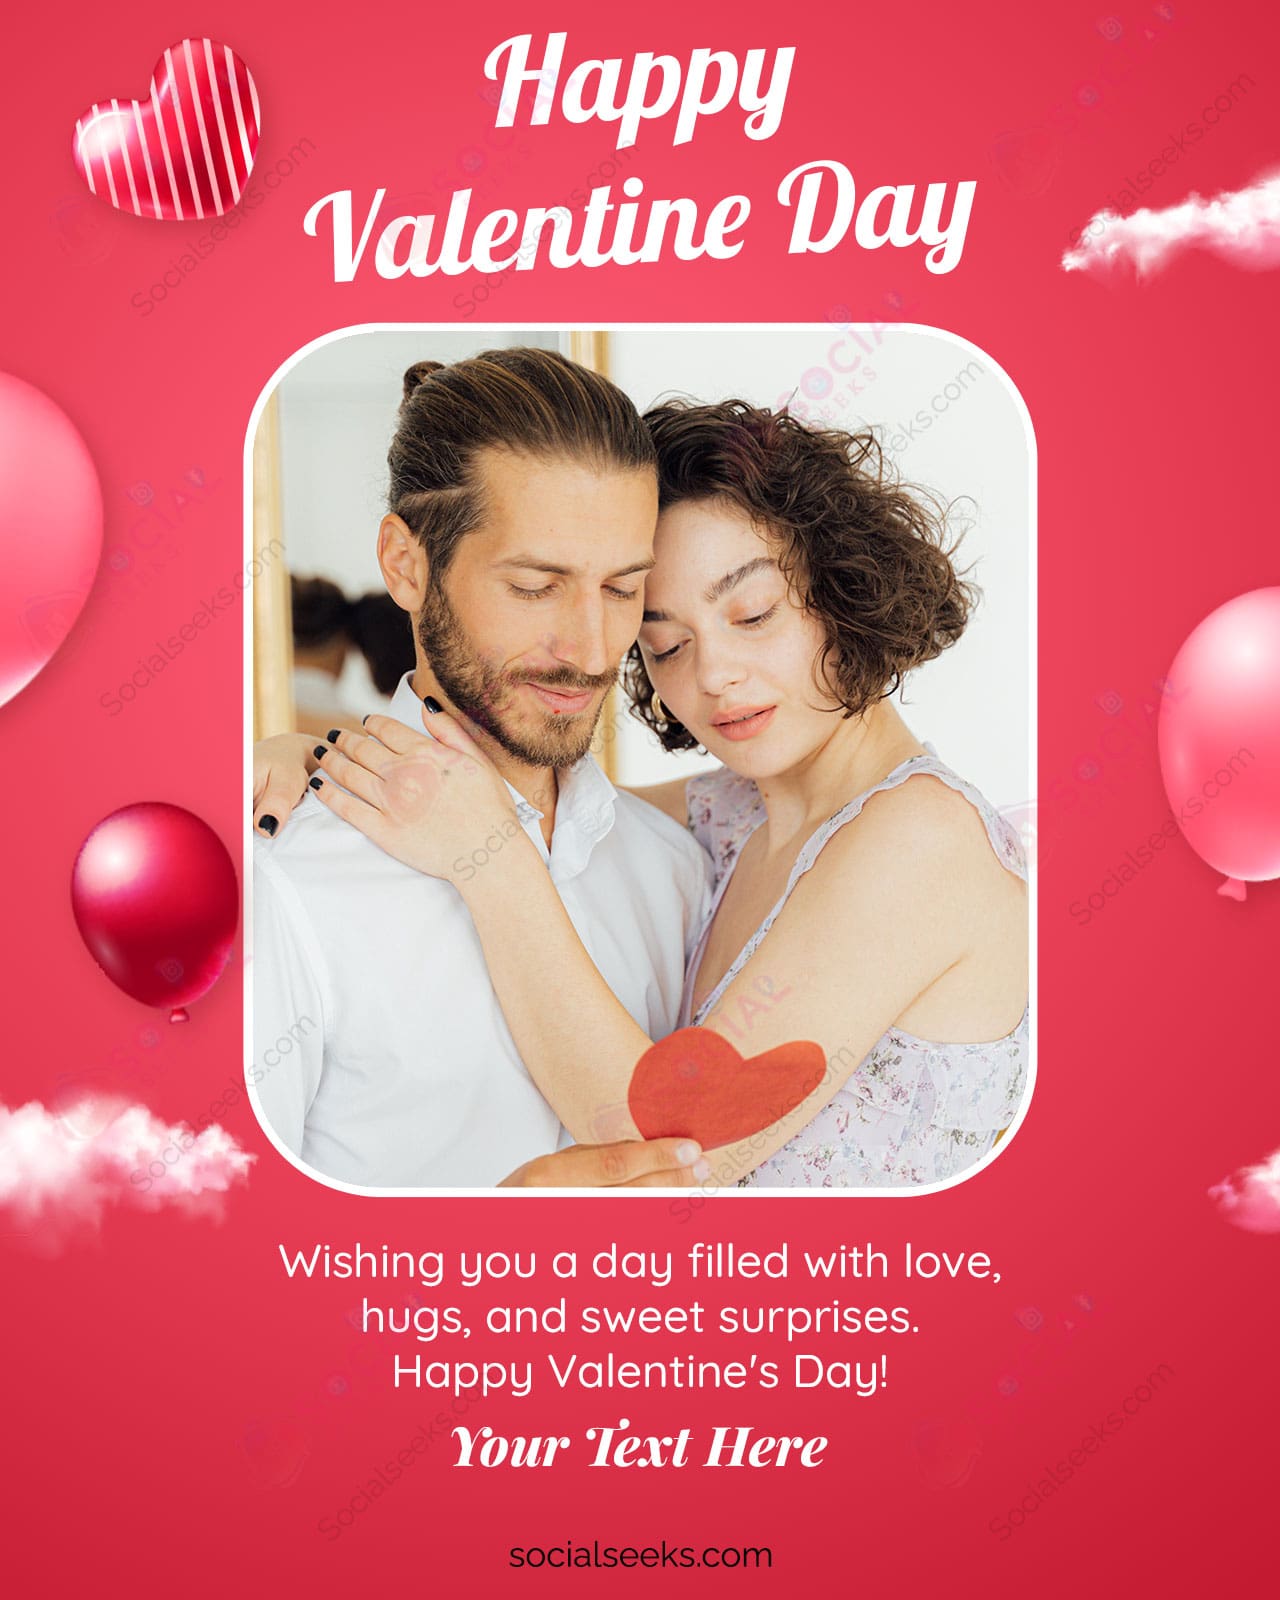 Be My Valentine Day Greeting Card With Photo & Name For Couples